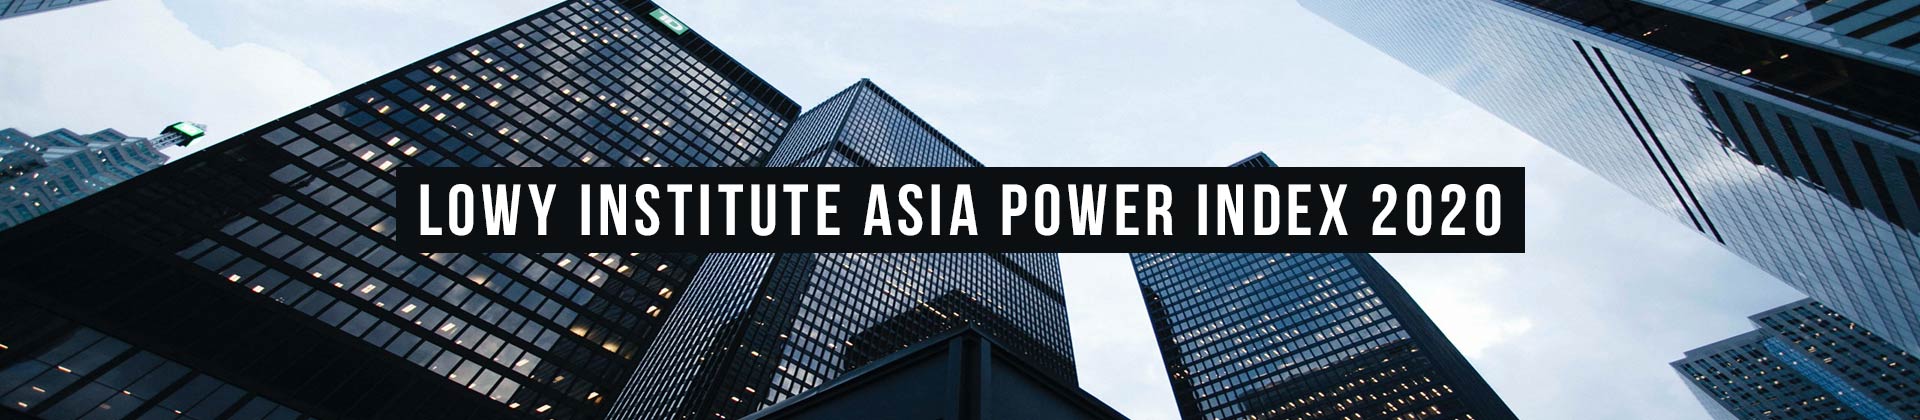 Digital discussion | The 2020 Lowy Institute Asia Power Index